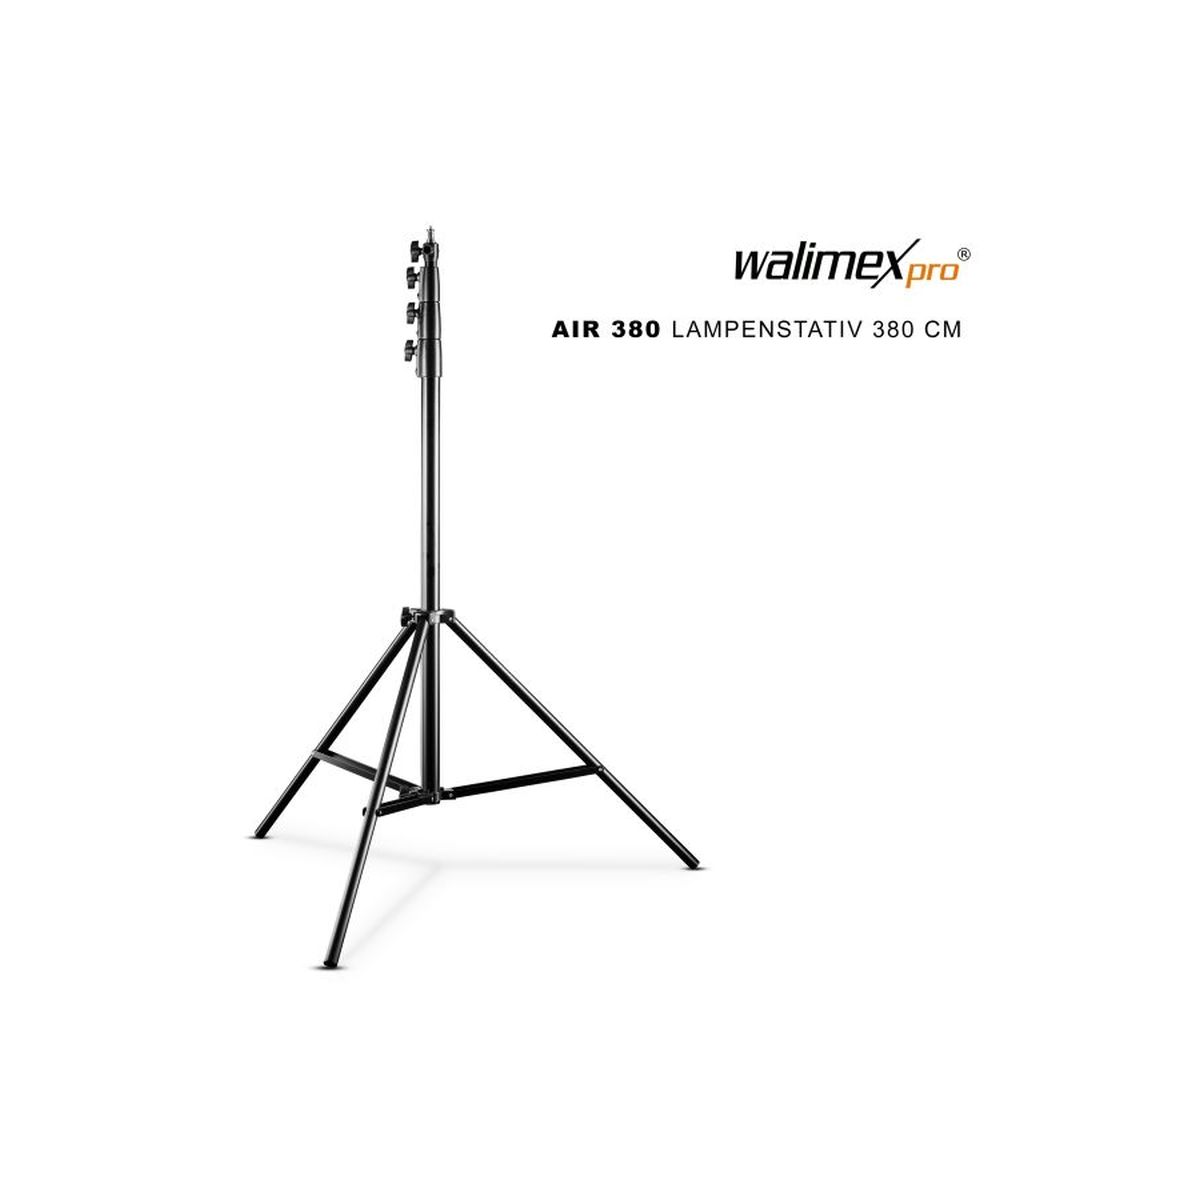 Walimex pro AIR 380 Deluxe Lampenstativ 380 cm